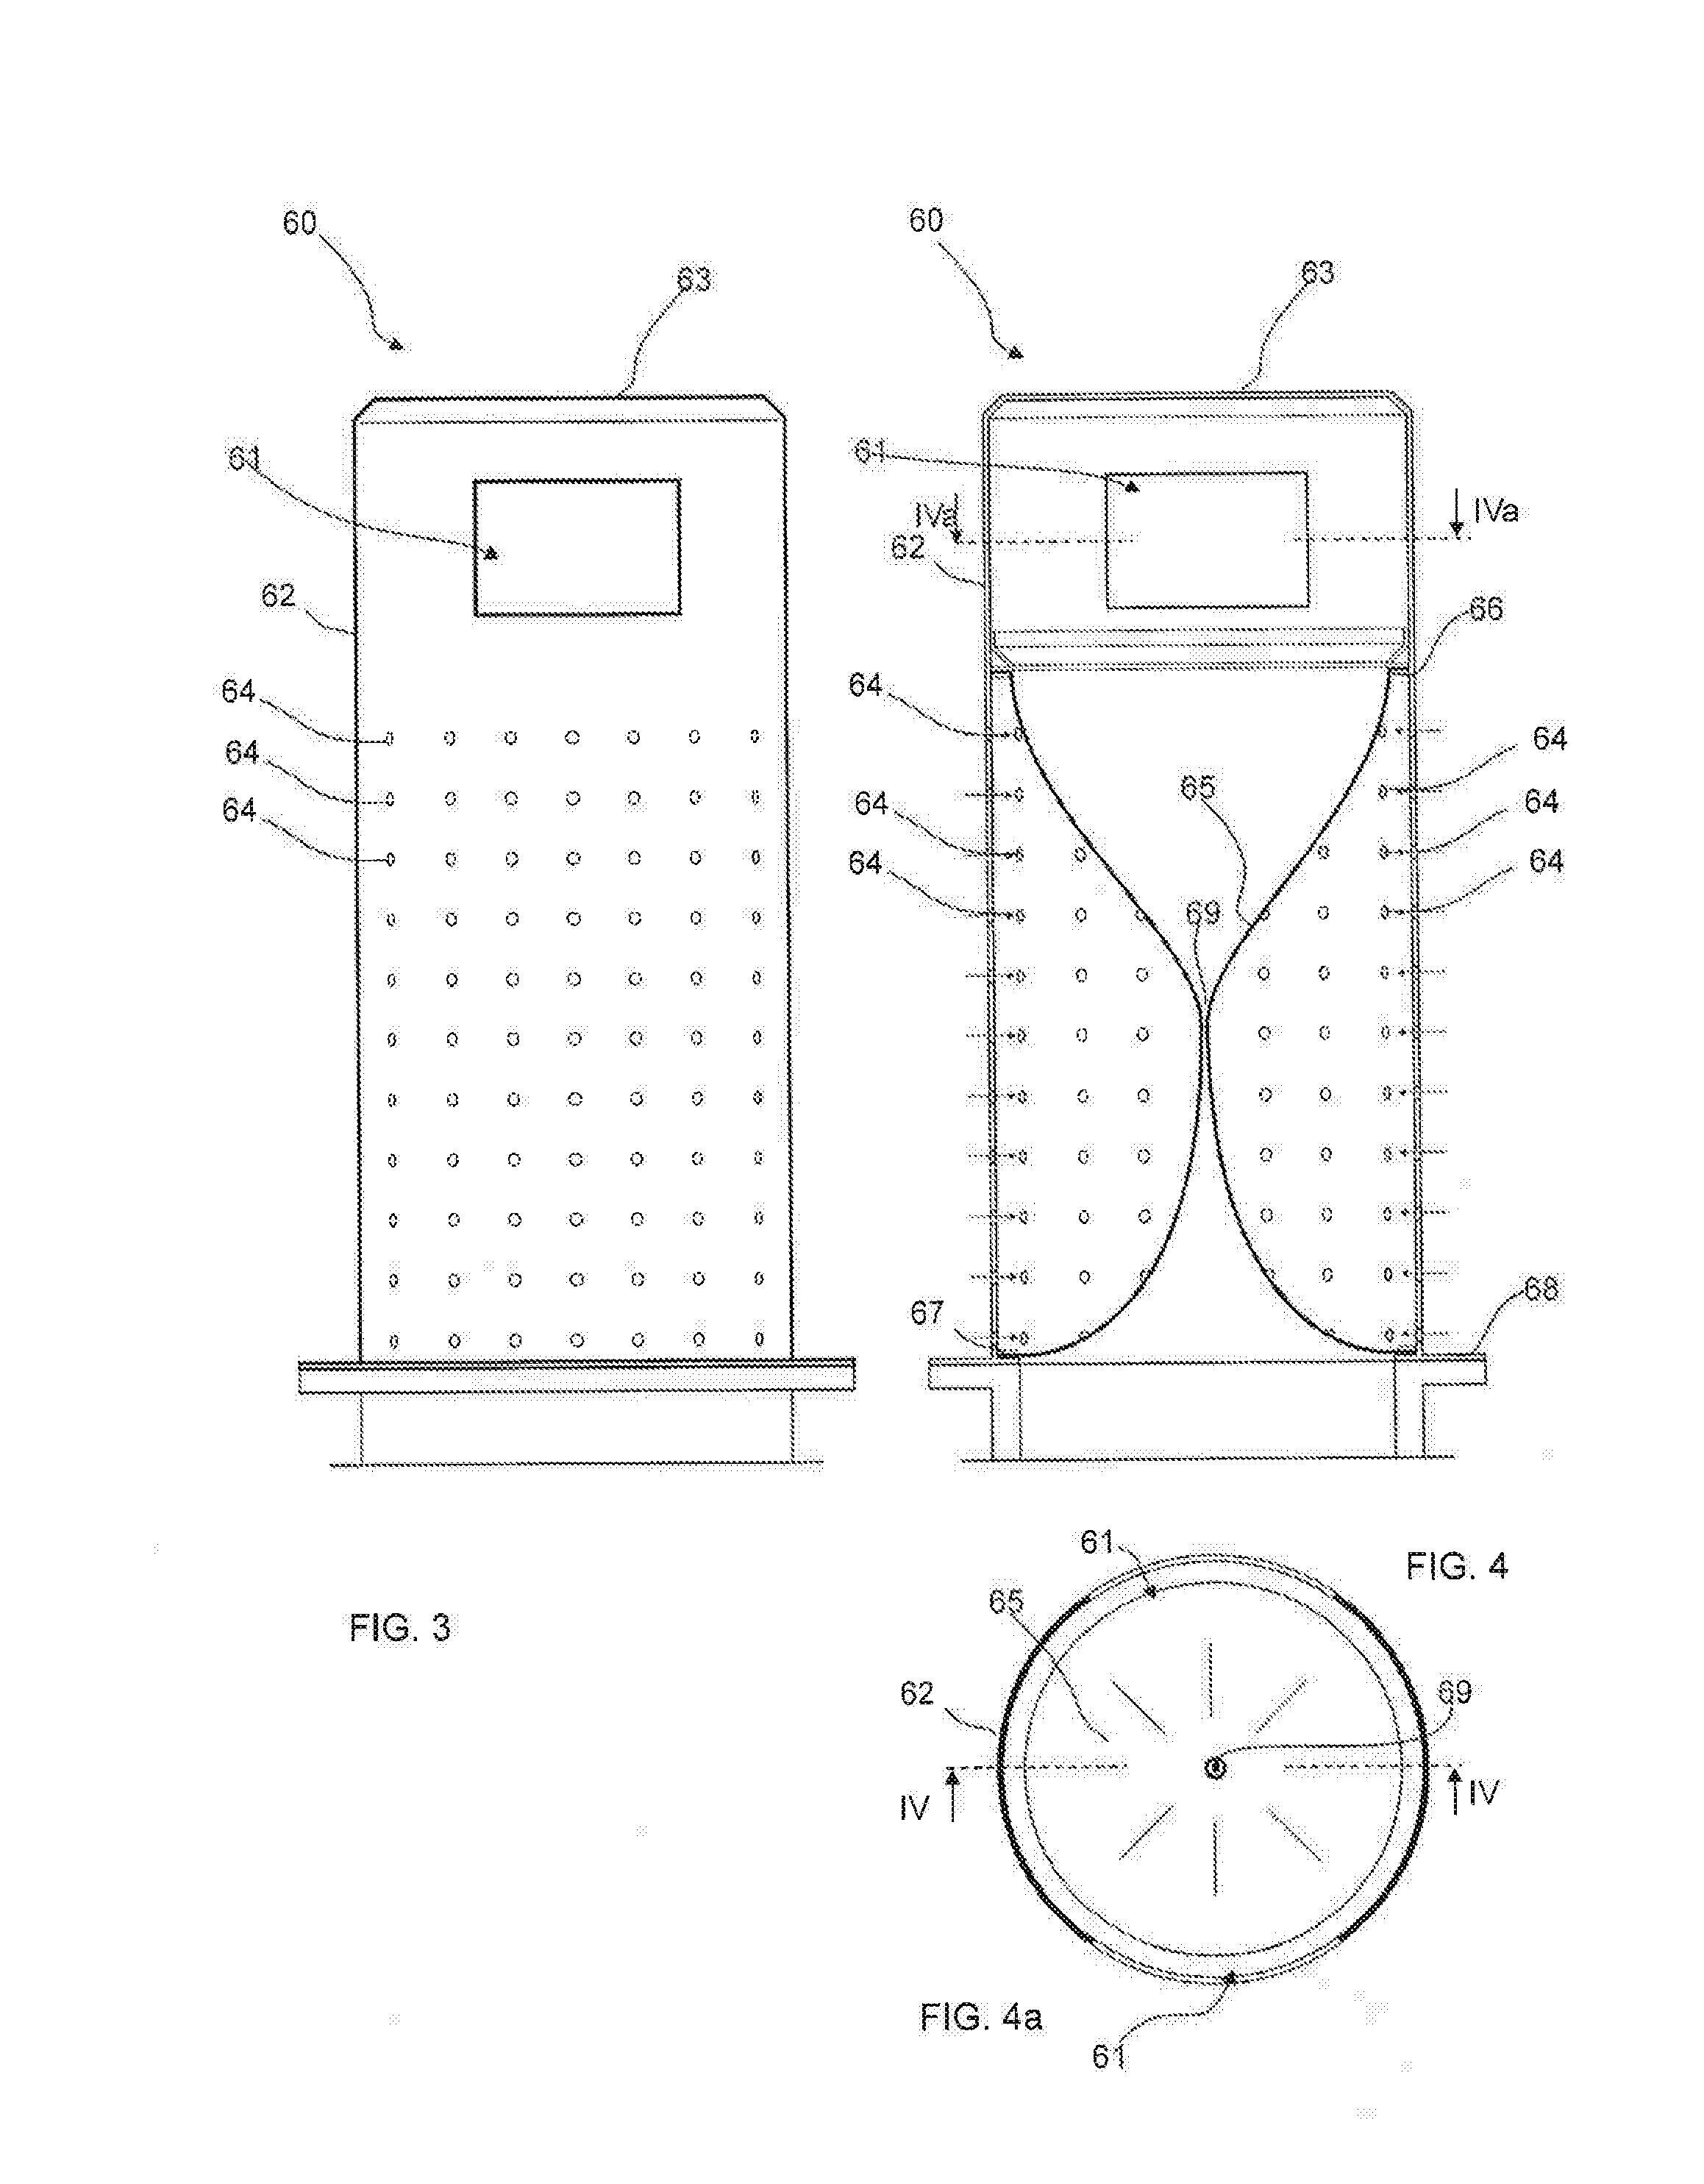 Method for handling material in a material conveying system, input point of a material conveying system, and a material conveying system